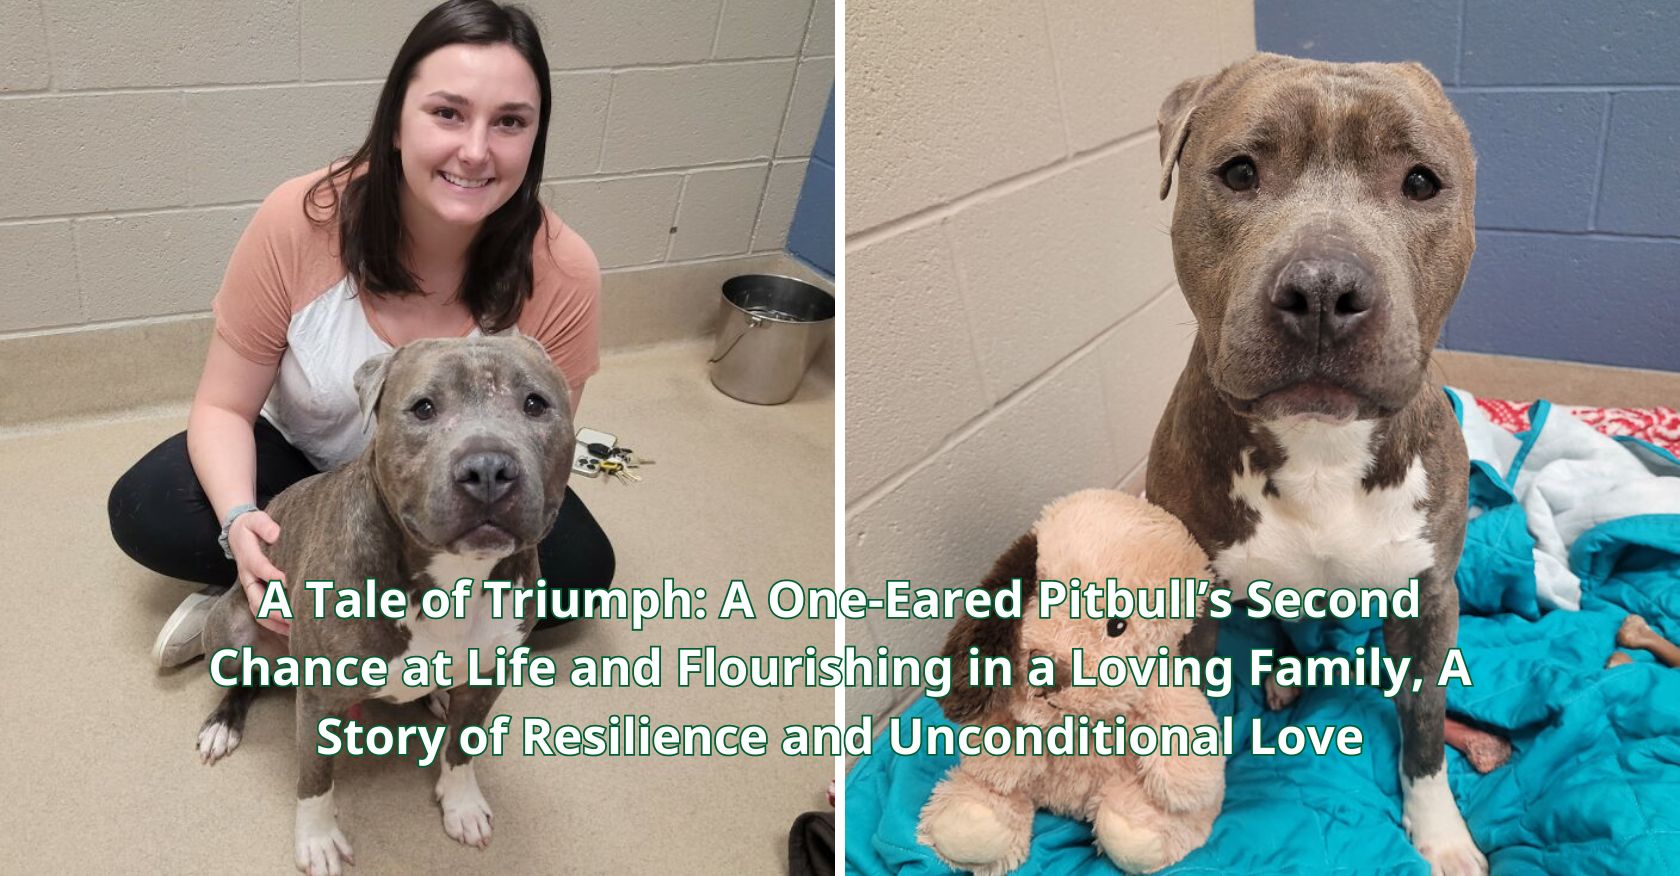 A Tale of Triumph: A One-Eared Pitbull’s Second Chance at Life and Flourishing in a Loving Family, A Story of Resilience and Unconditional Love